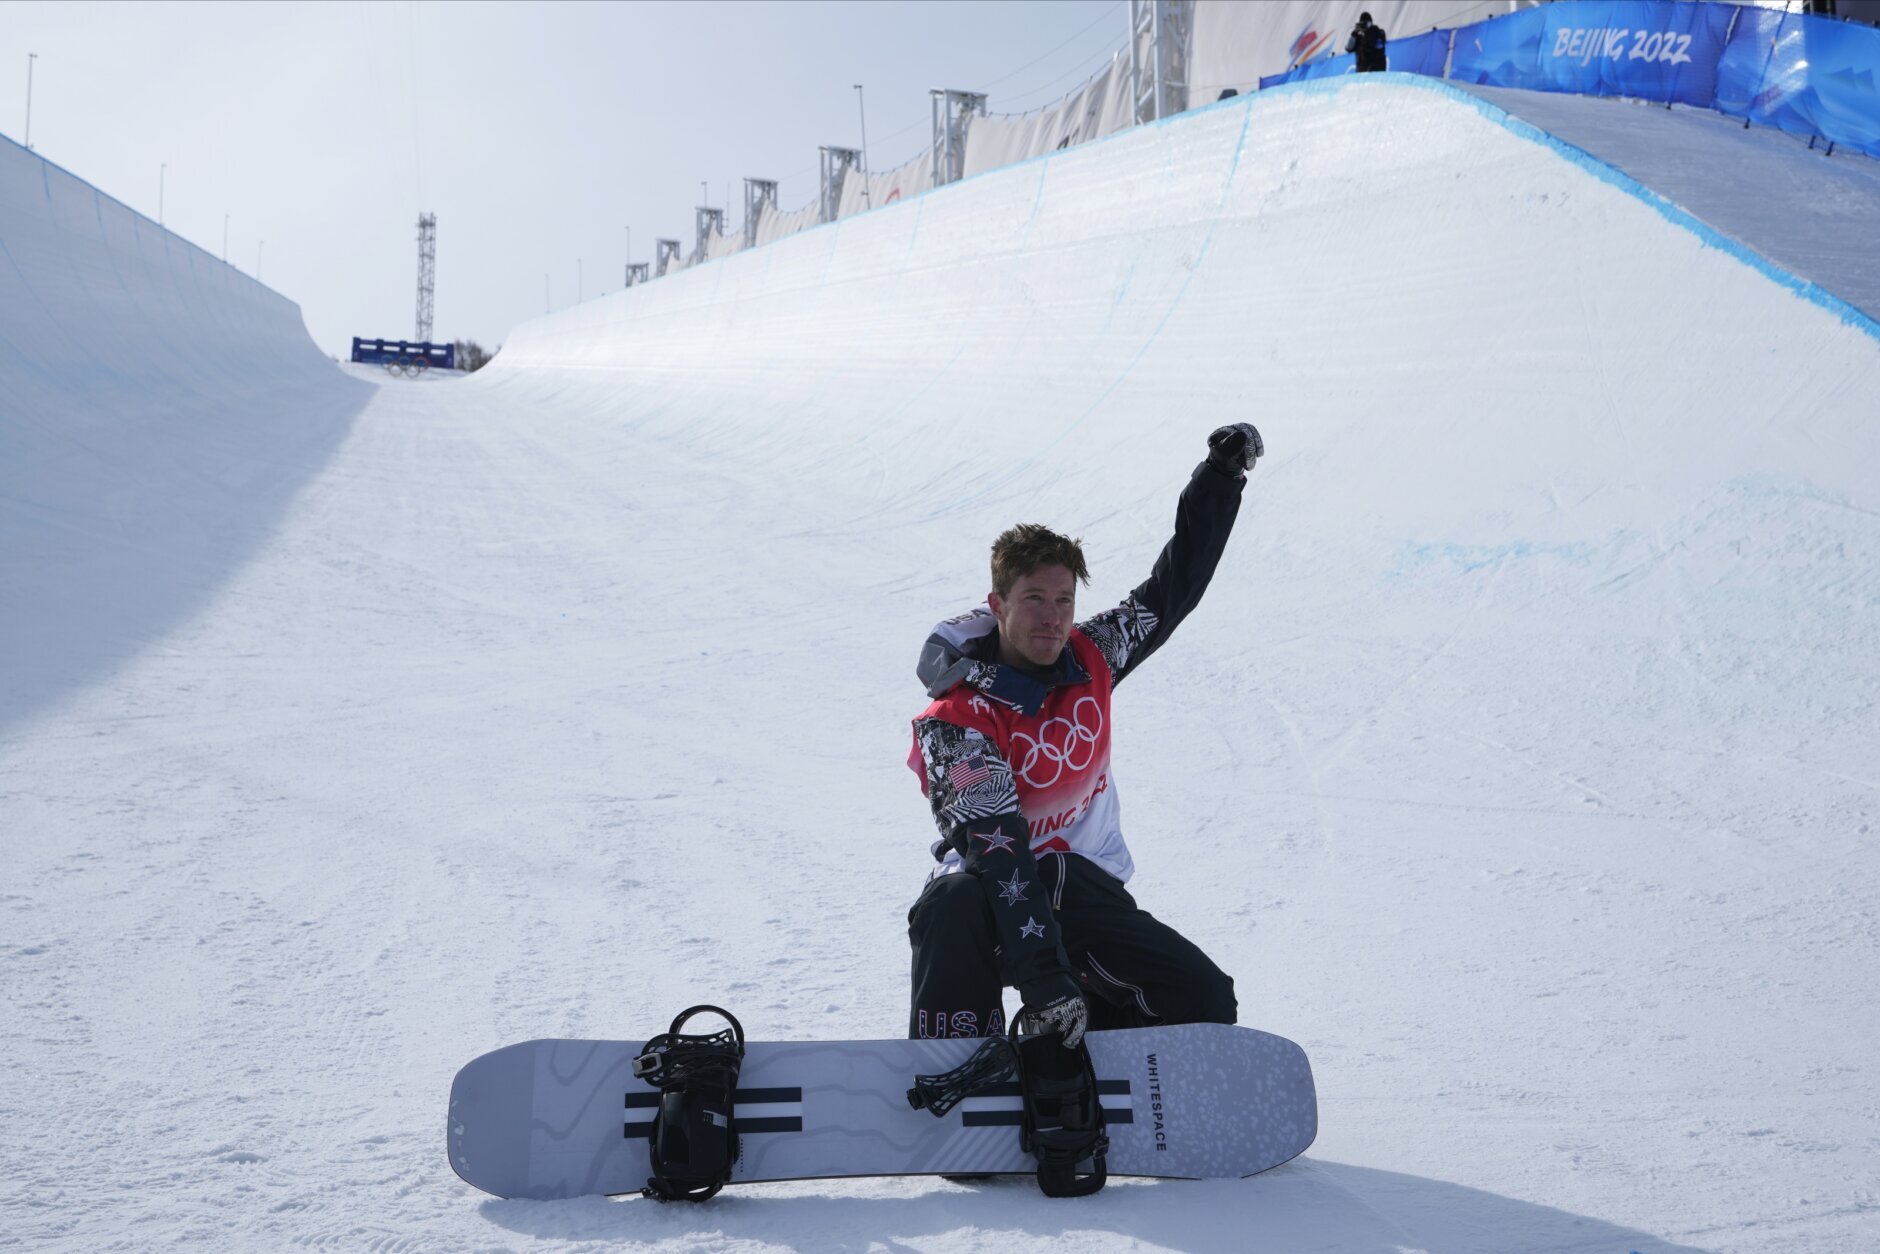 United States' Shaun White poses in the halfpipe course after the men's halfpipe finals at the 2022 Winter Olympics, Friday, Feb. 11, 2022, in Zhangjiakou, China. (AP Photo/Lee Jin-man)